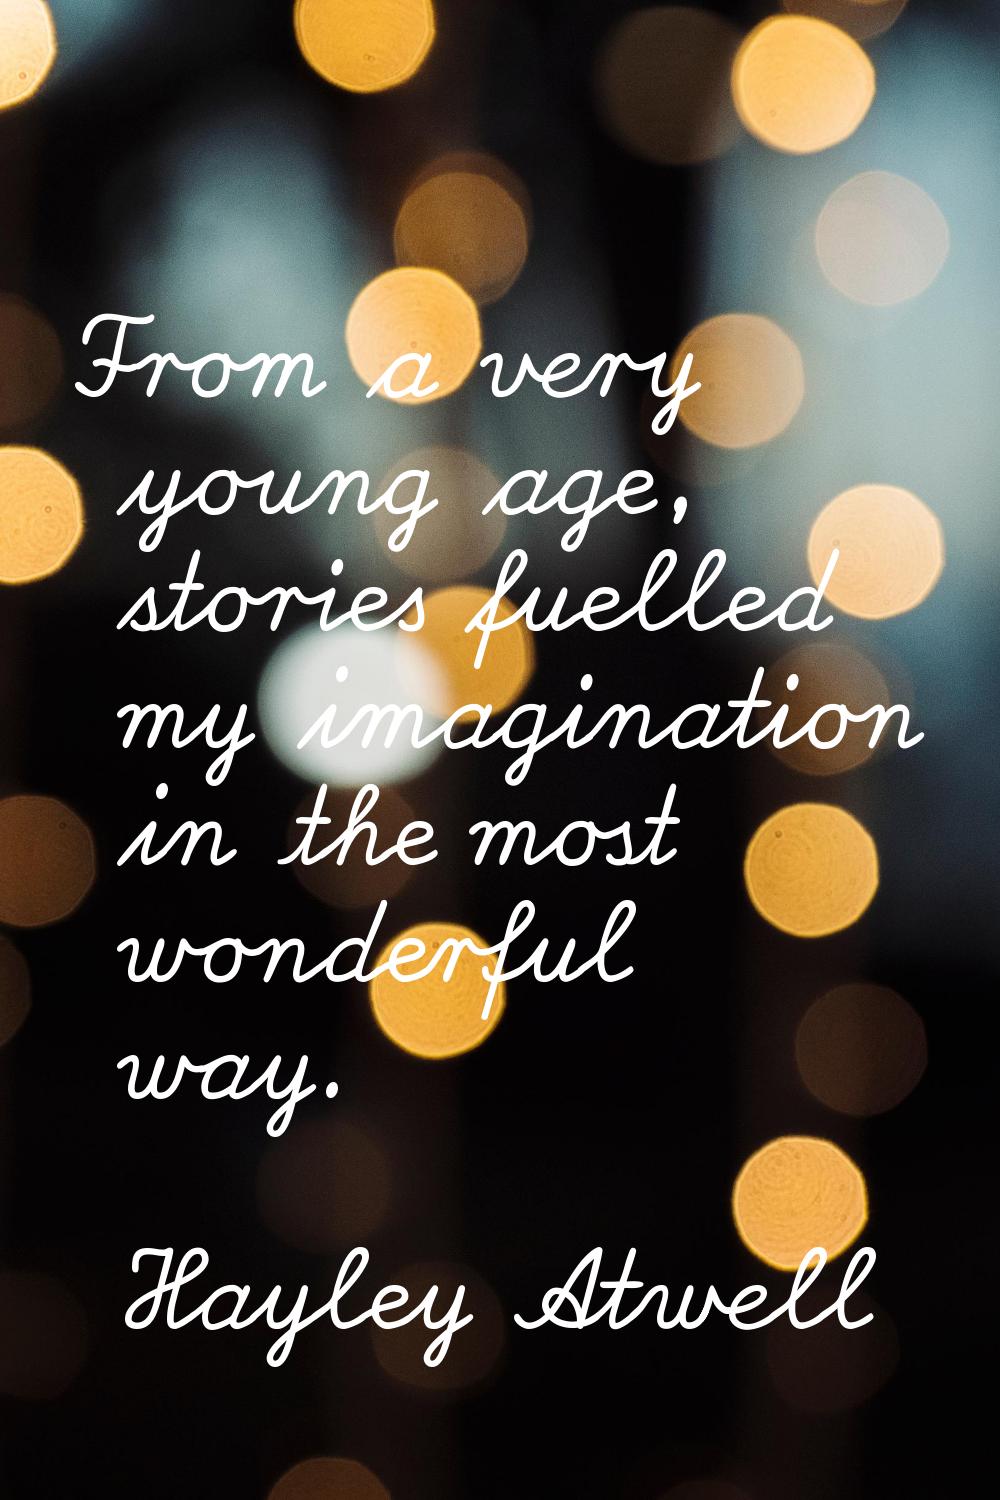 From a very young age, stories fuelled my imagination in the most wonderful way.